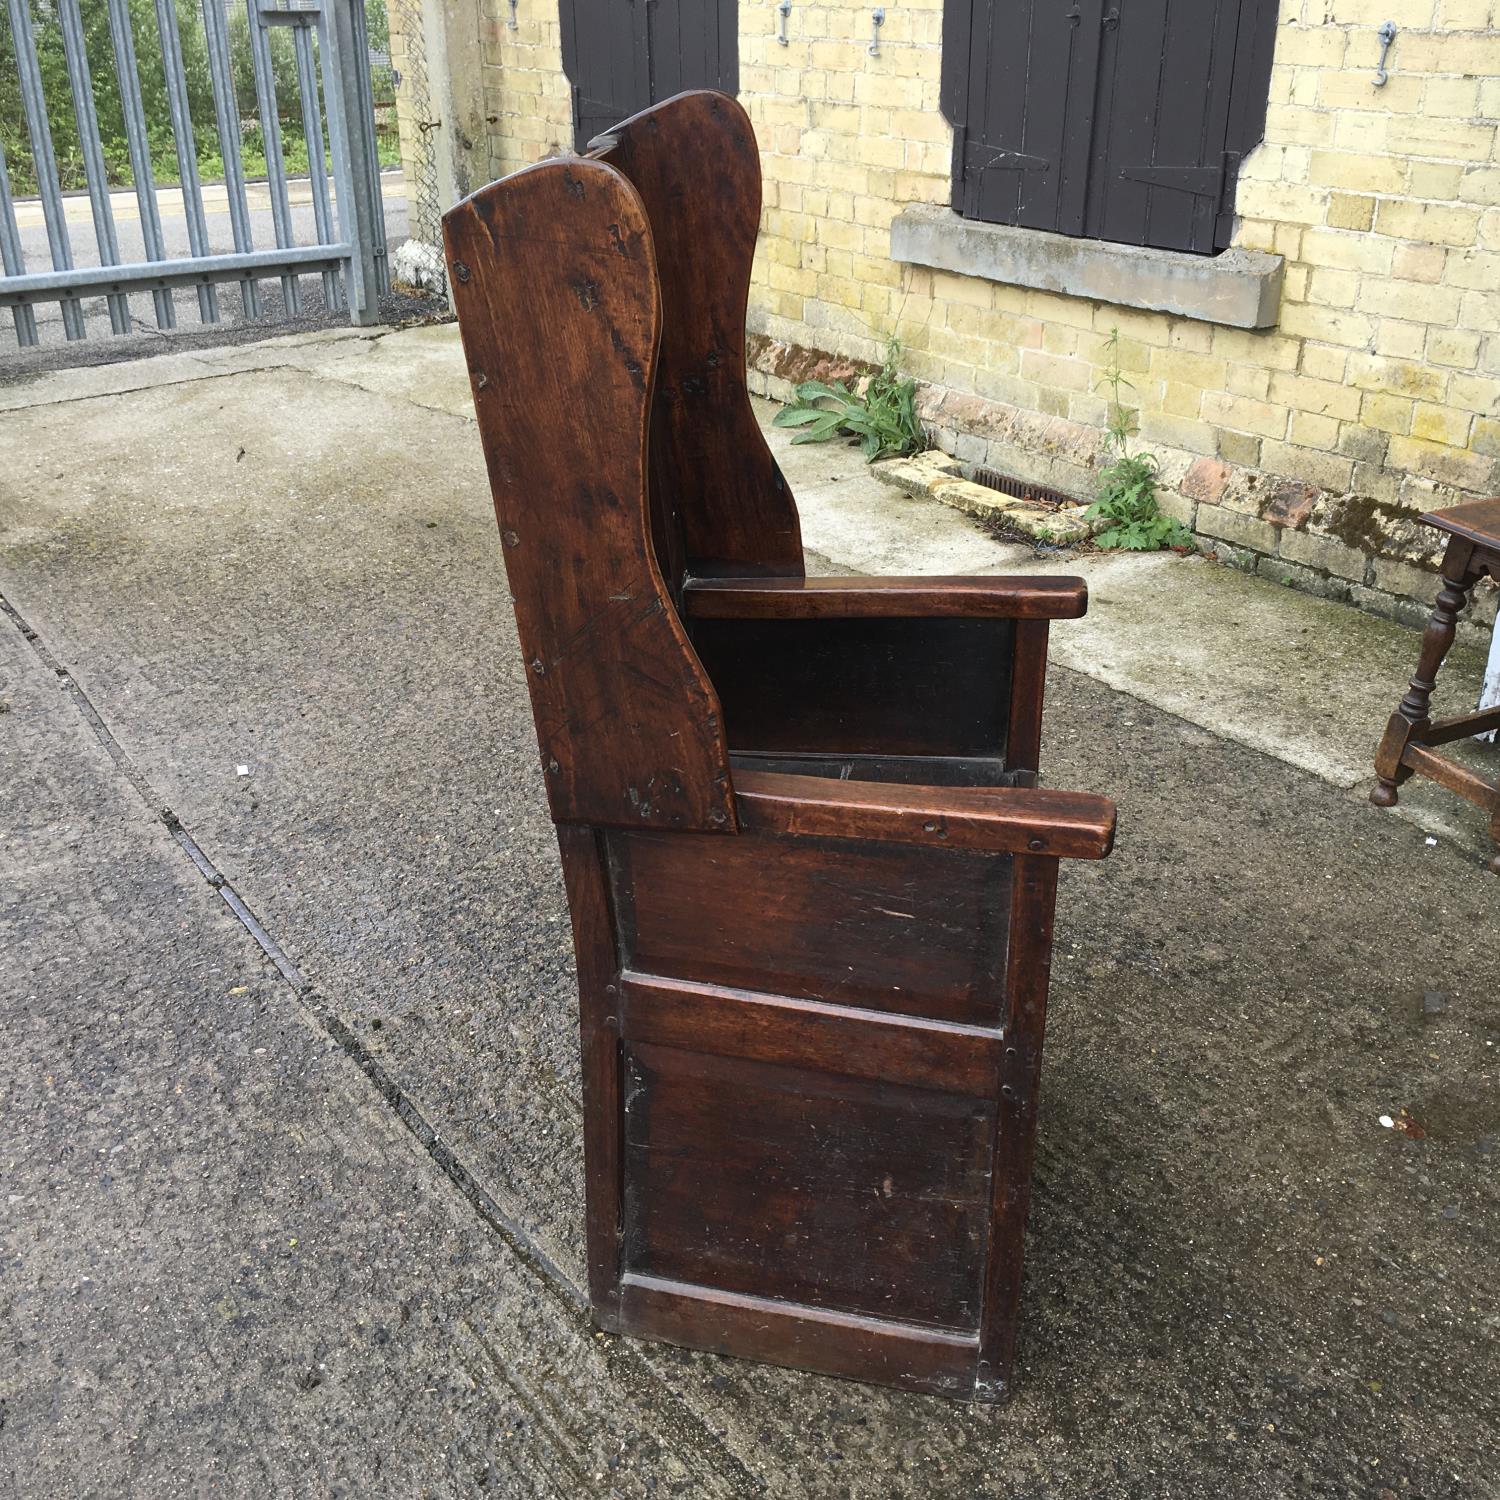 Interesting 18th century Monks Hall chair, 3' tall 24" wide (see photo for construction details) - Image 2 of 7